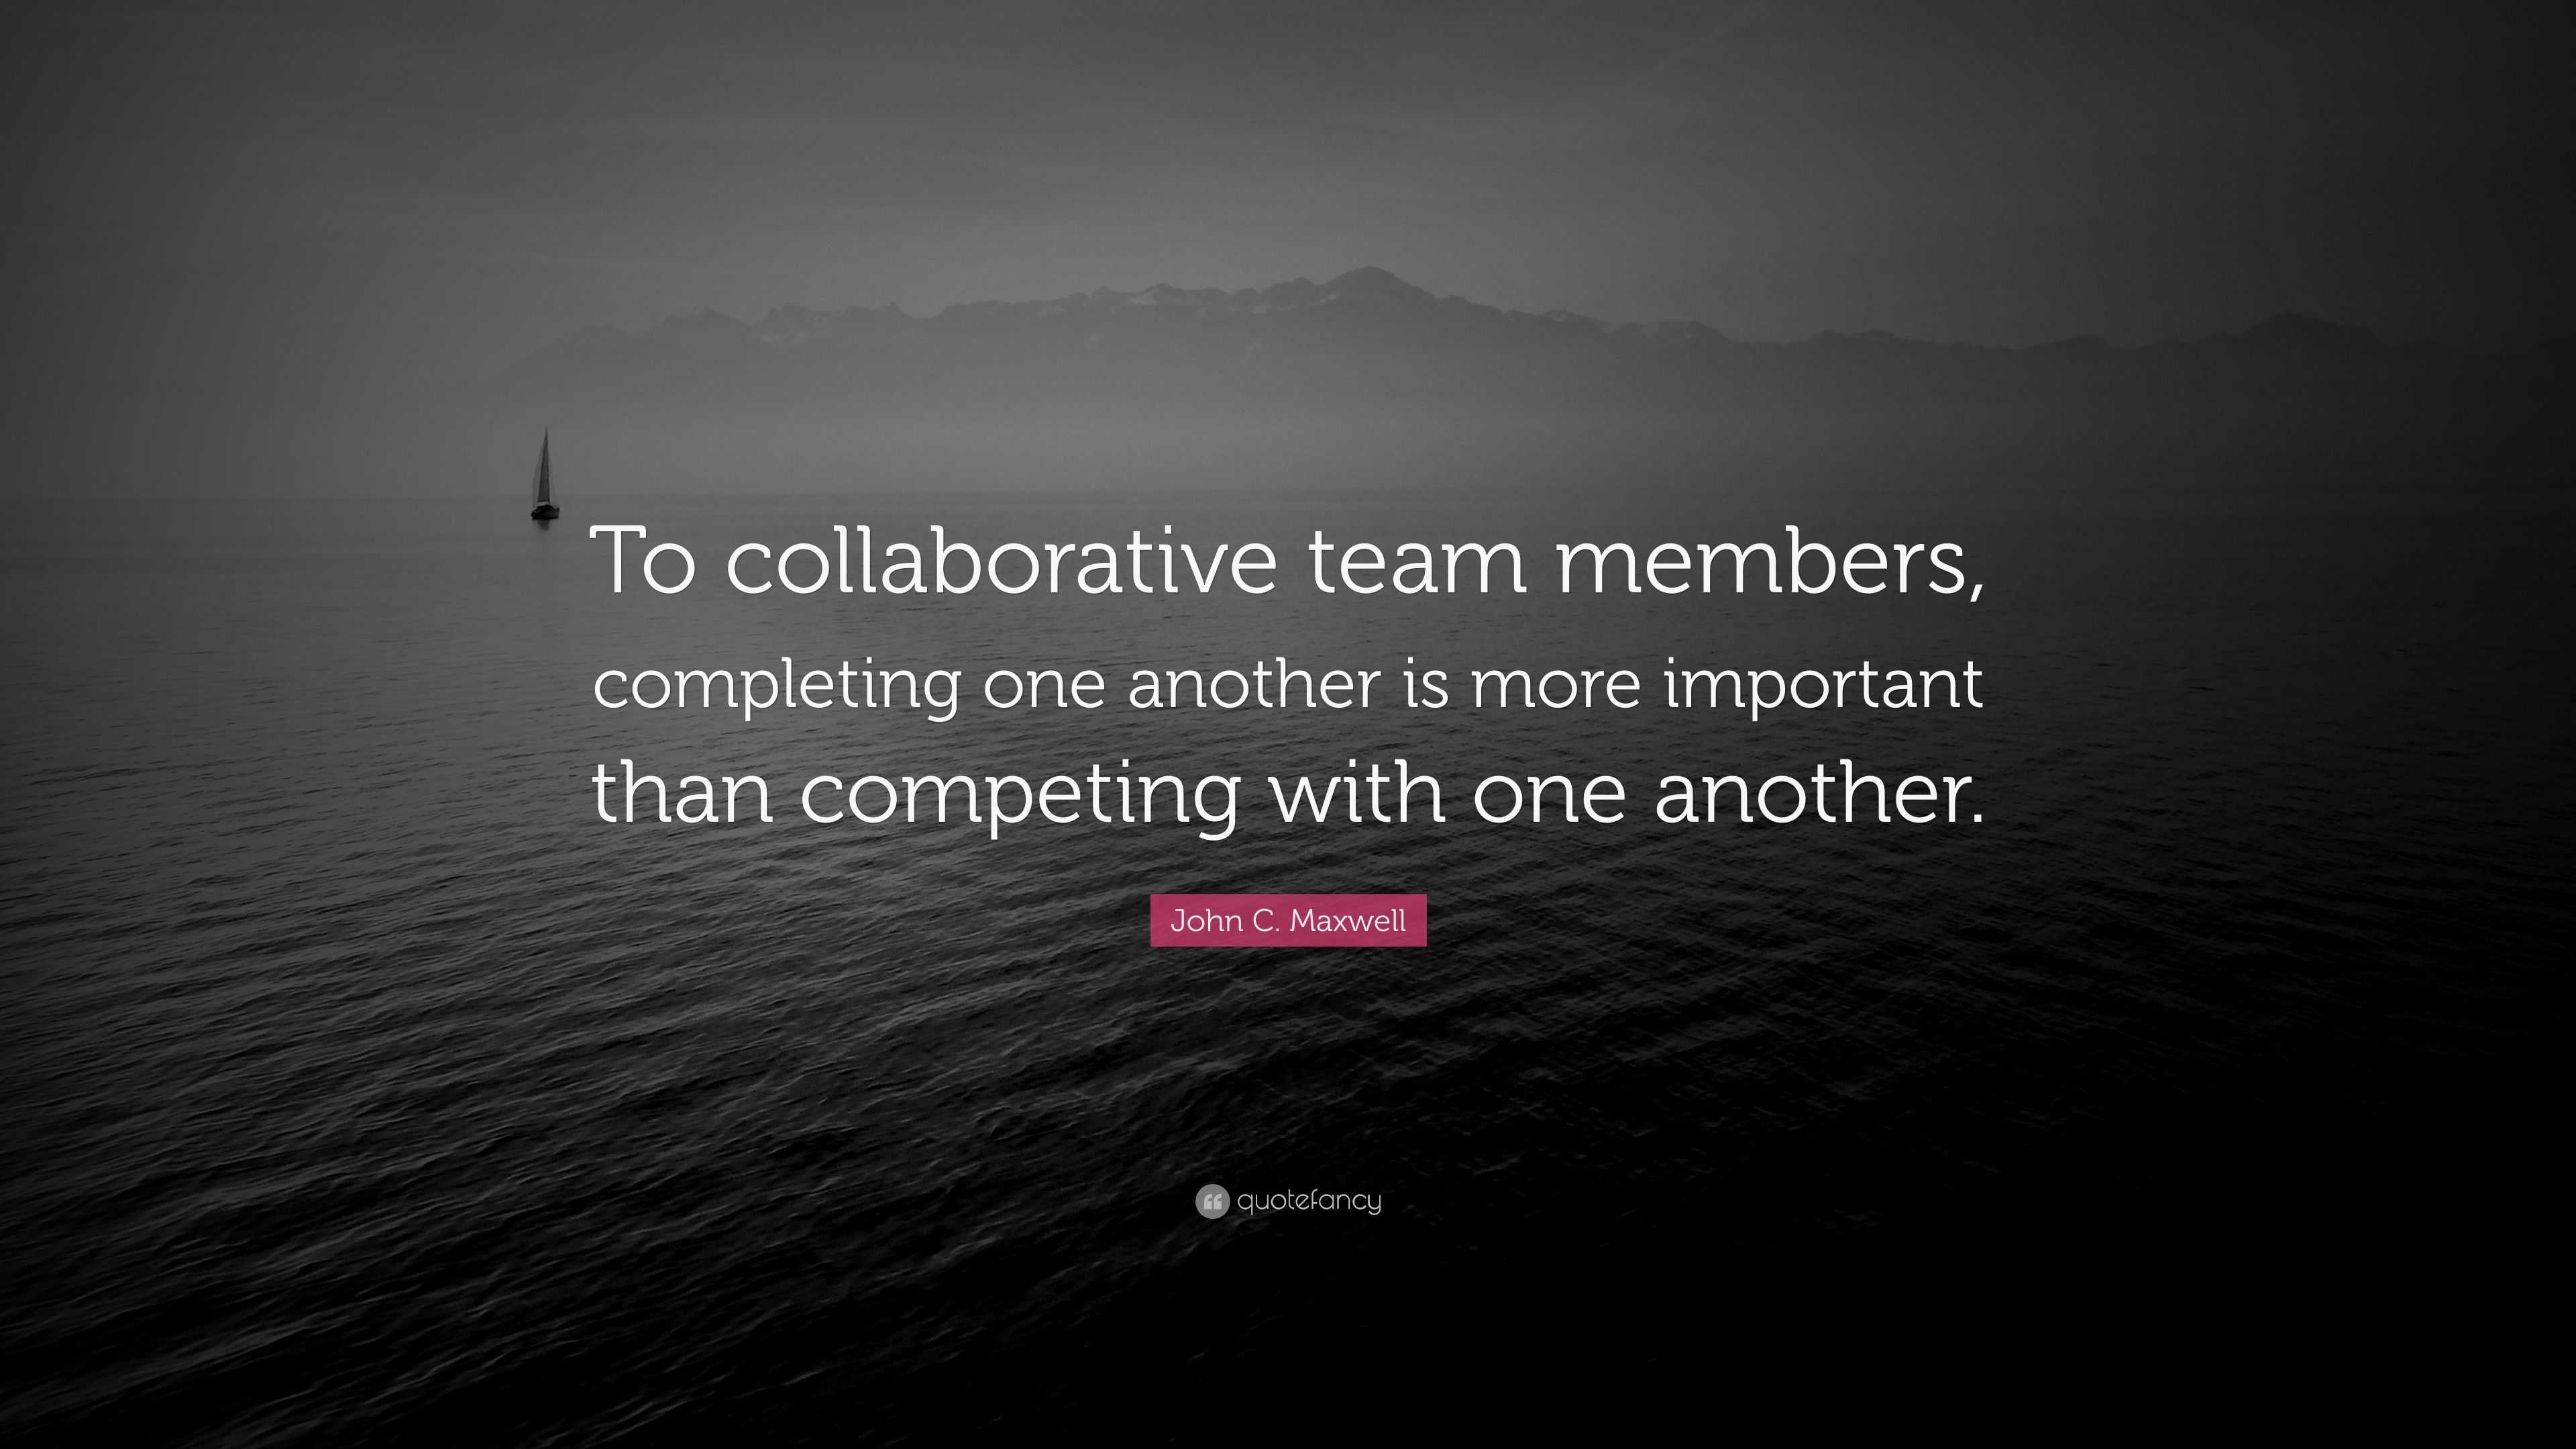 John C. Maxwell Quote: “To collaborative team members, completing one